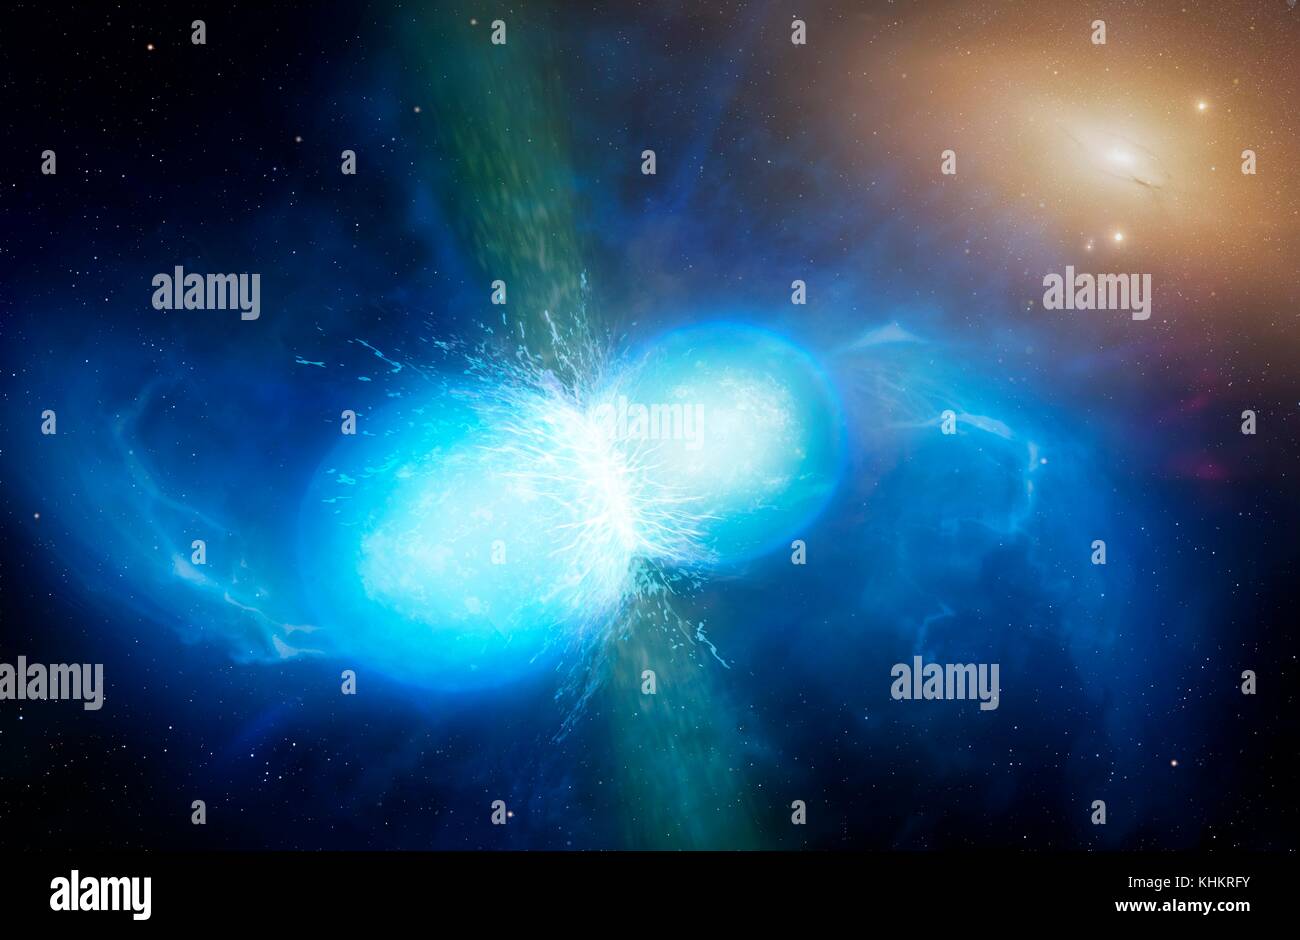 Neutron stars merging, illustration. Neutron stars are the remnants of stars that have run out of fuel and exploded as supernova, eventually collapsing into a superdense core. A typical neutron star has a mass of between 1.3 and 2.1 solar masses but measures only 10km in diameter. Neutron stars can exist as paired, or binary, stars. Seen here is the very final stage, just before full merger. This causes a violent burst of magnetic radiation lasting milliseconds. It is suggested that this is the source of short gamma ray bursts. Stock Photo